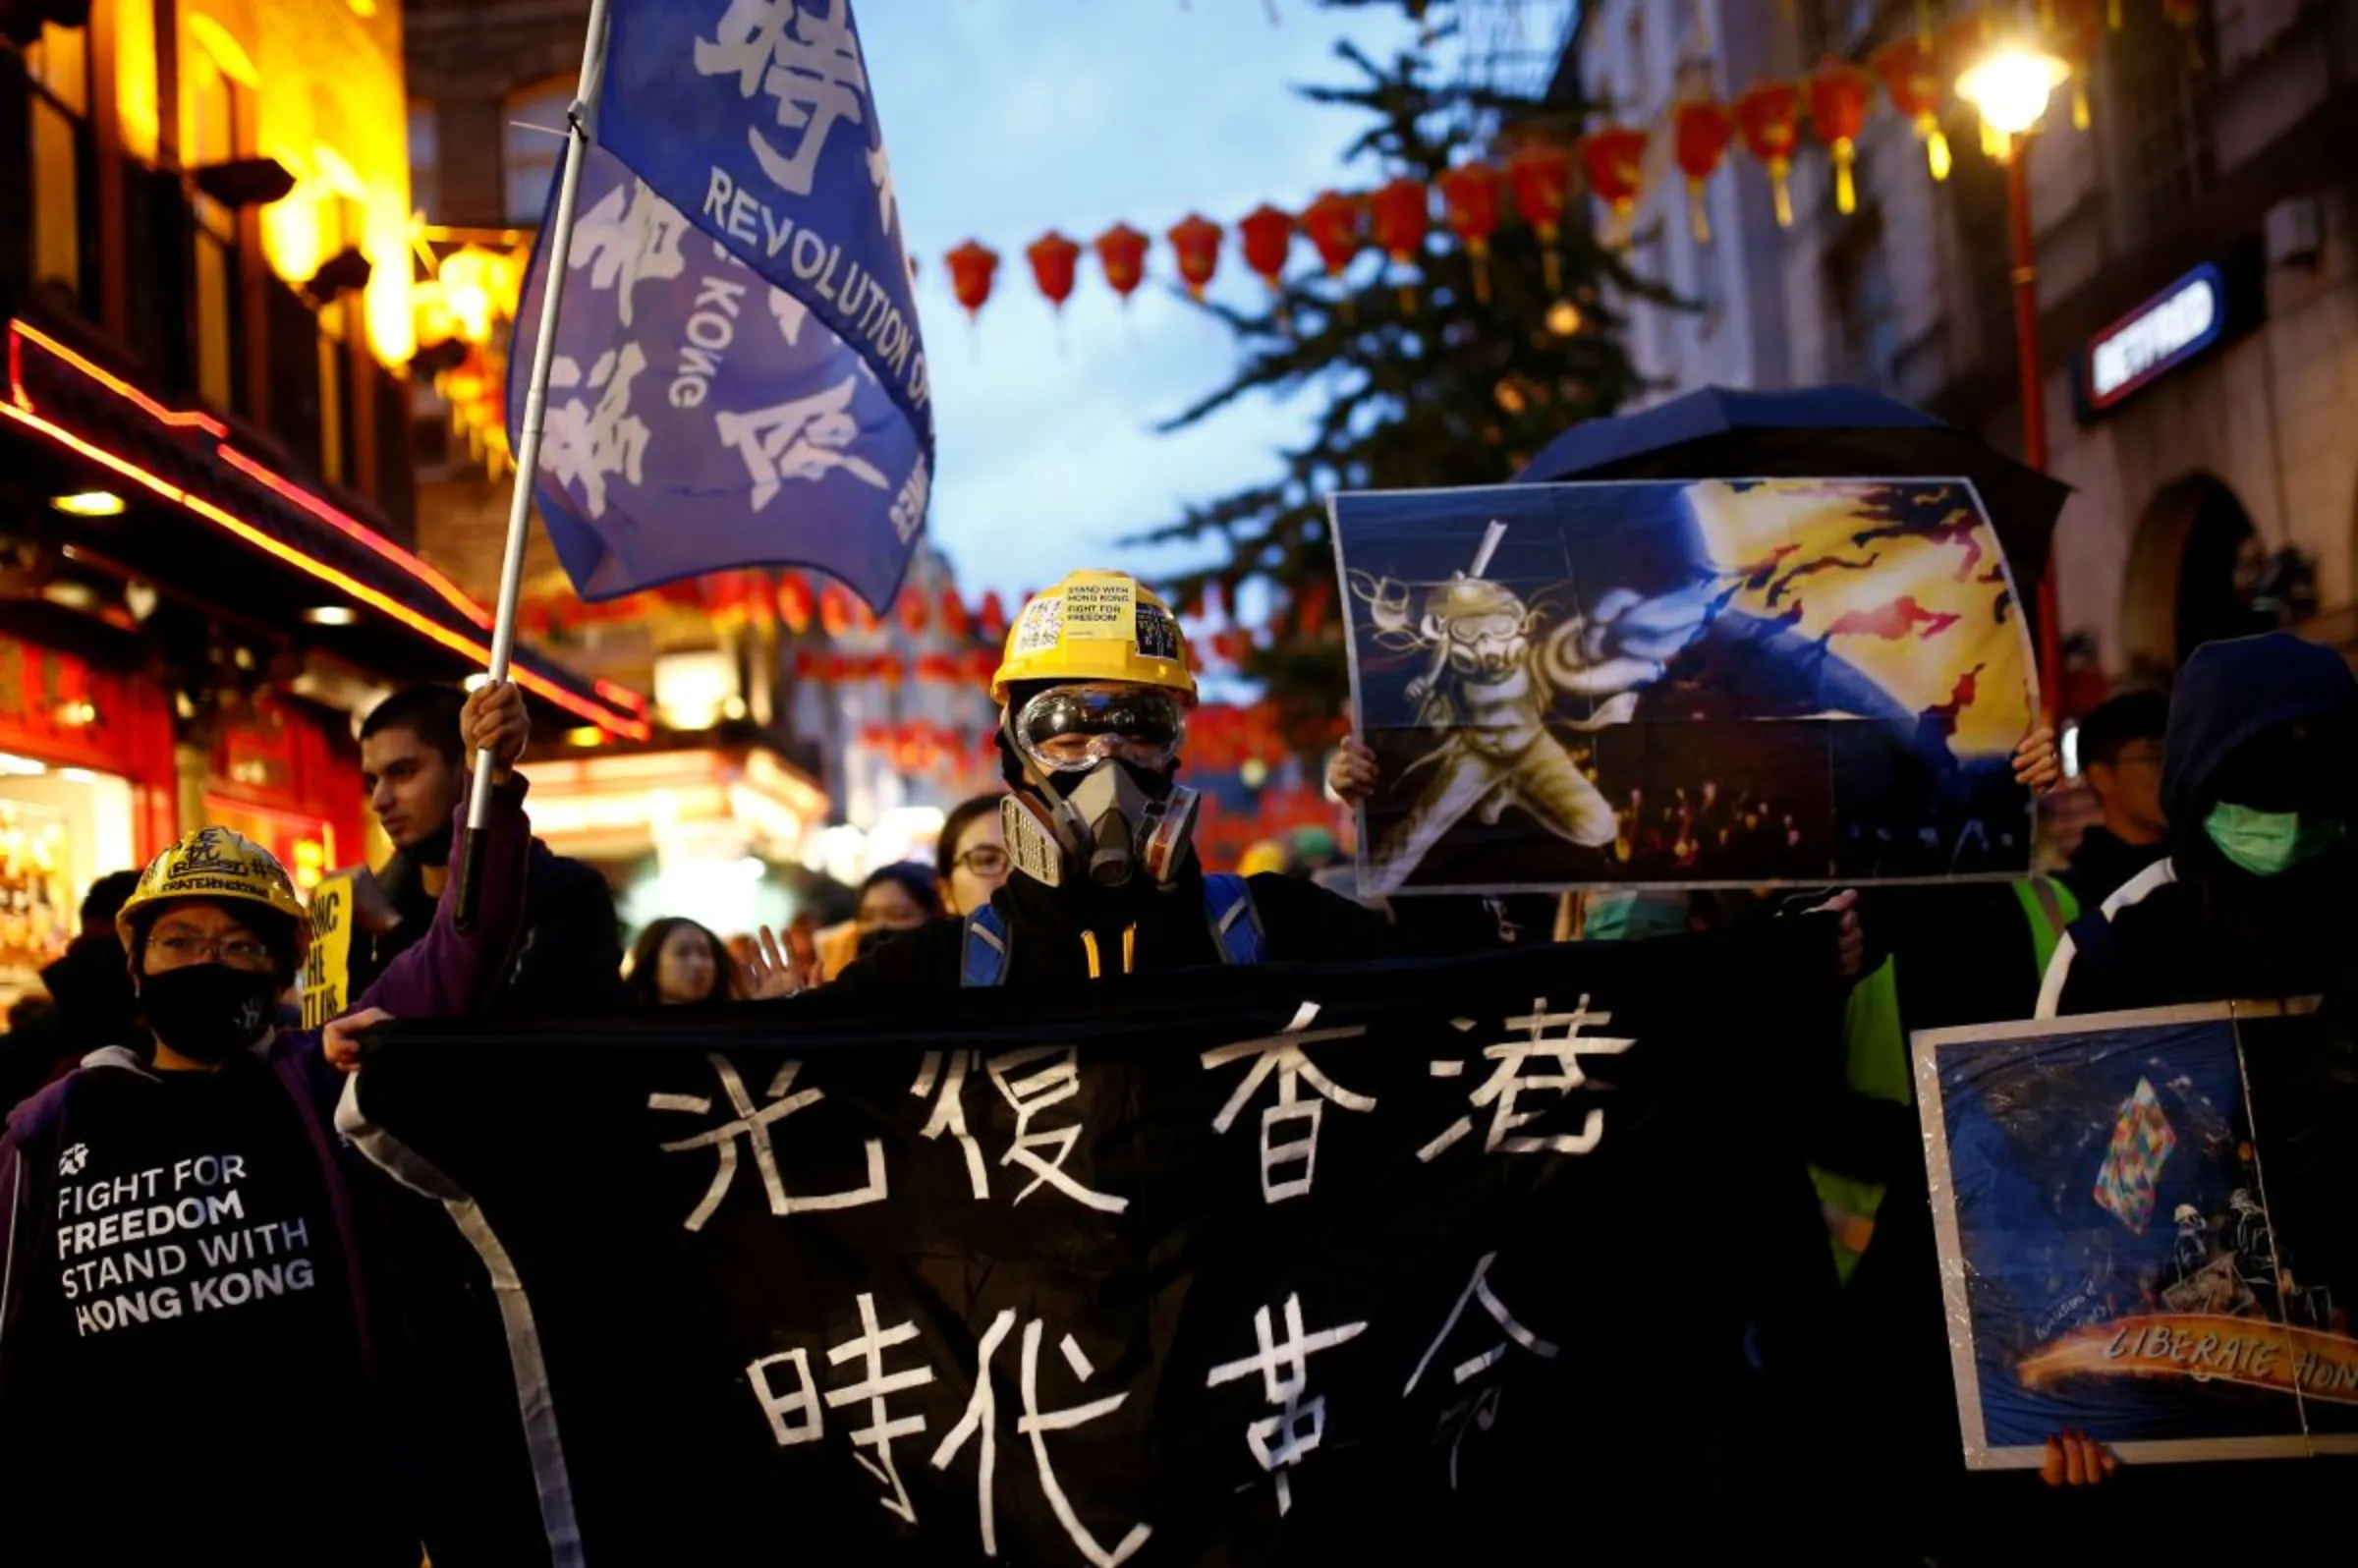 Demonstrators march during a 'Stand with Hong Kong' rally in London, Britain, November 2, 2019